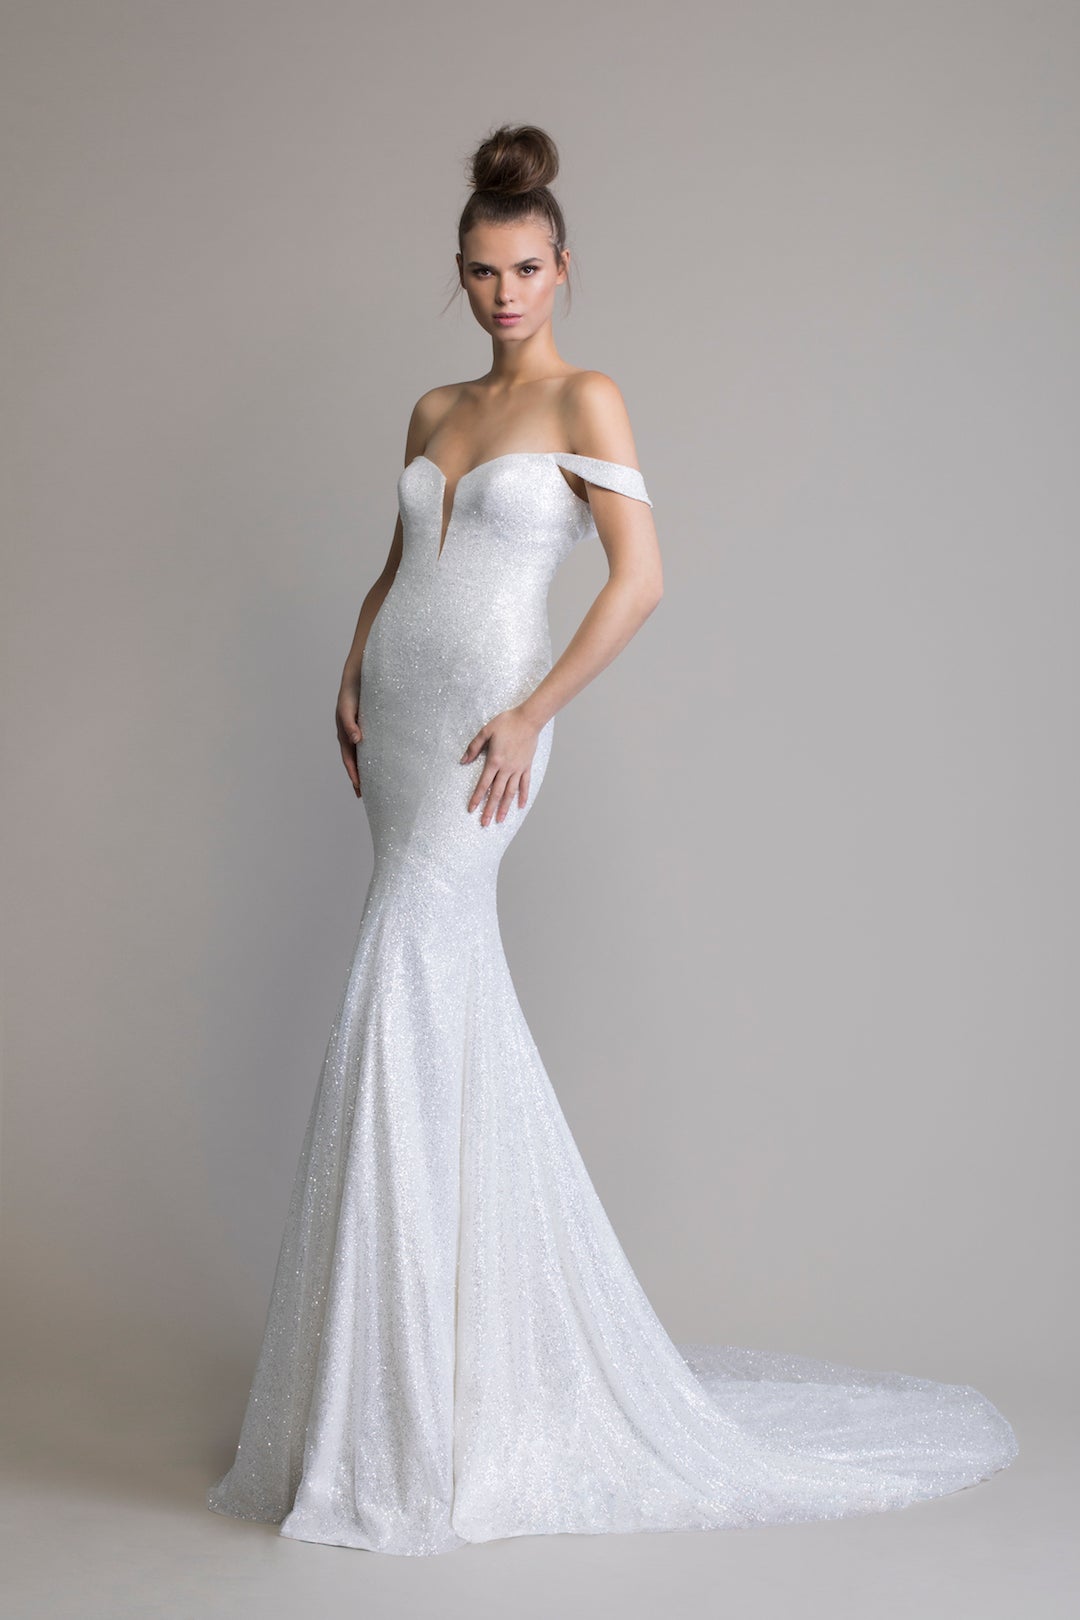 Pnina Tornai's new LOVE 2020 Collection is out! This is style 14770